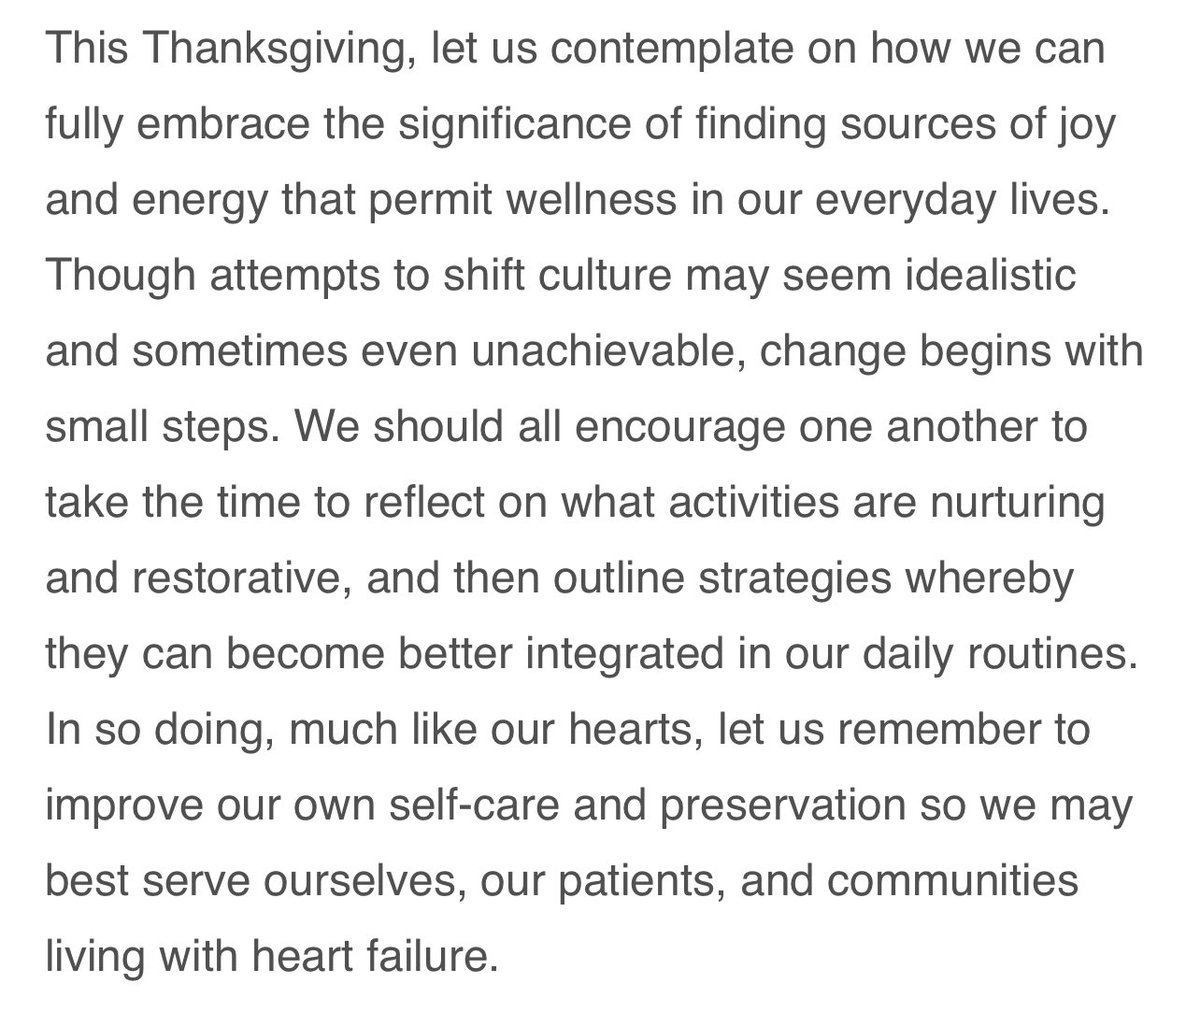 We are of little use running on empty. Let’s do more than ‘normalize’ self-care. Let’s prioritize it. Not by getting a massage or taking a day off, but by finding what nurtures us & integrating it into everyday life. @JCardFail from 11/21 w/@robmentz onlinejcf.com/article/S1071-…